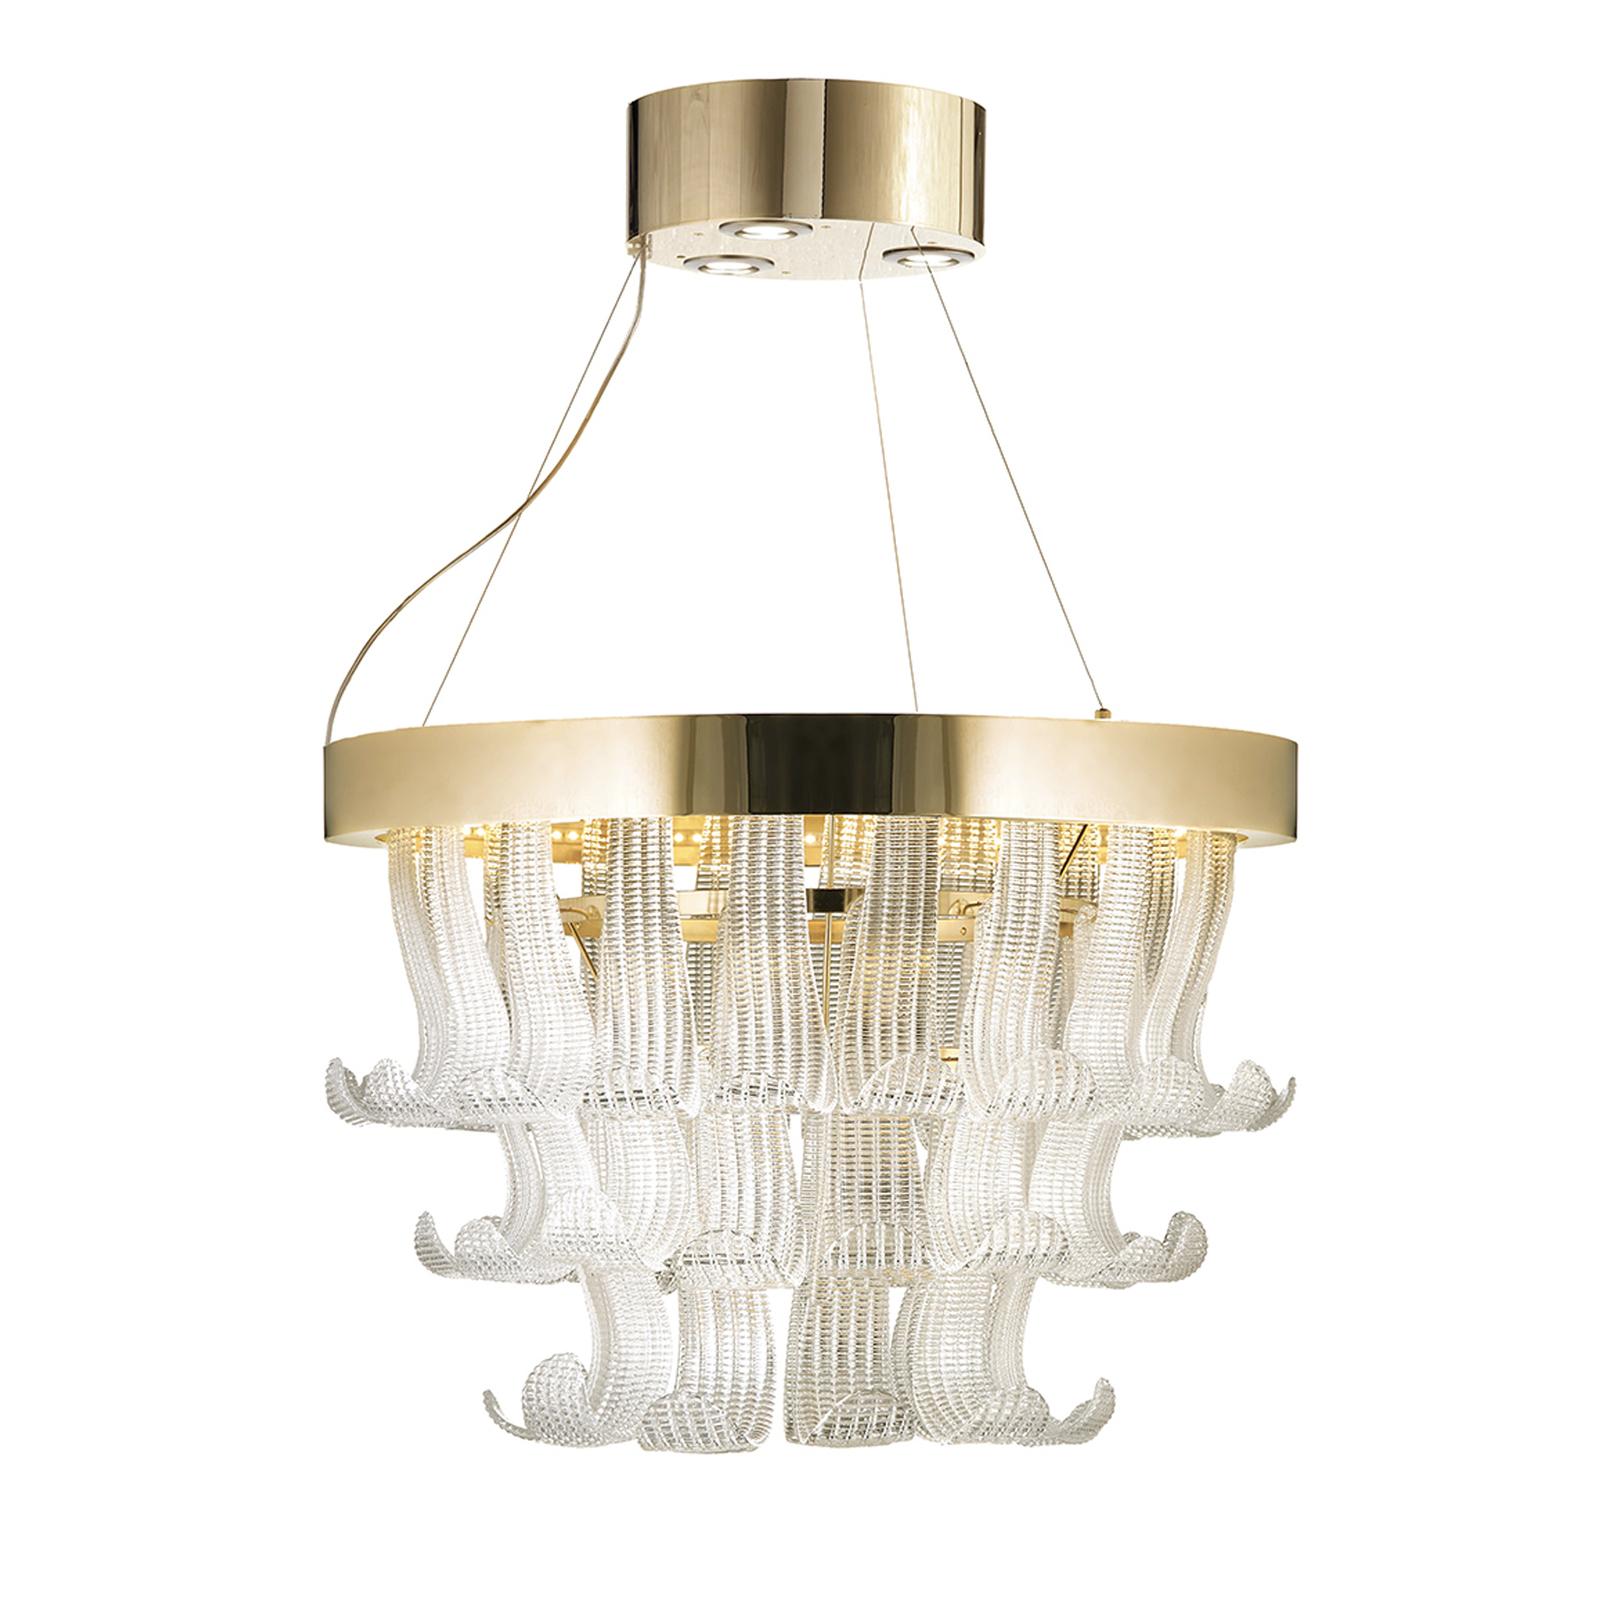 Part of the Ring collection, this superb chandelier exudes the bold, stylish elegance of the Art Deco style. Its top in metal with a gold finish holds three GU10 LED bulbs and supports a ring-shaped structure of the same material on which a 2700 K